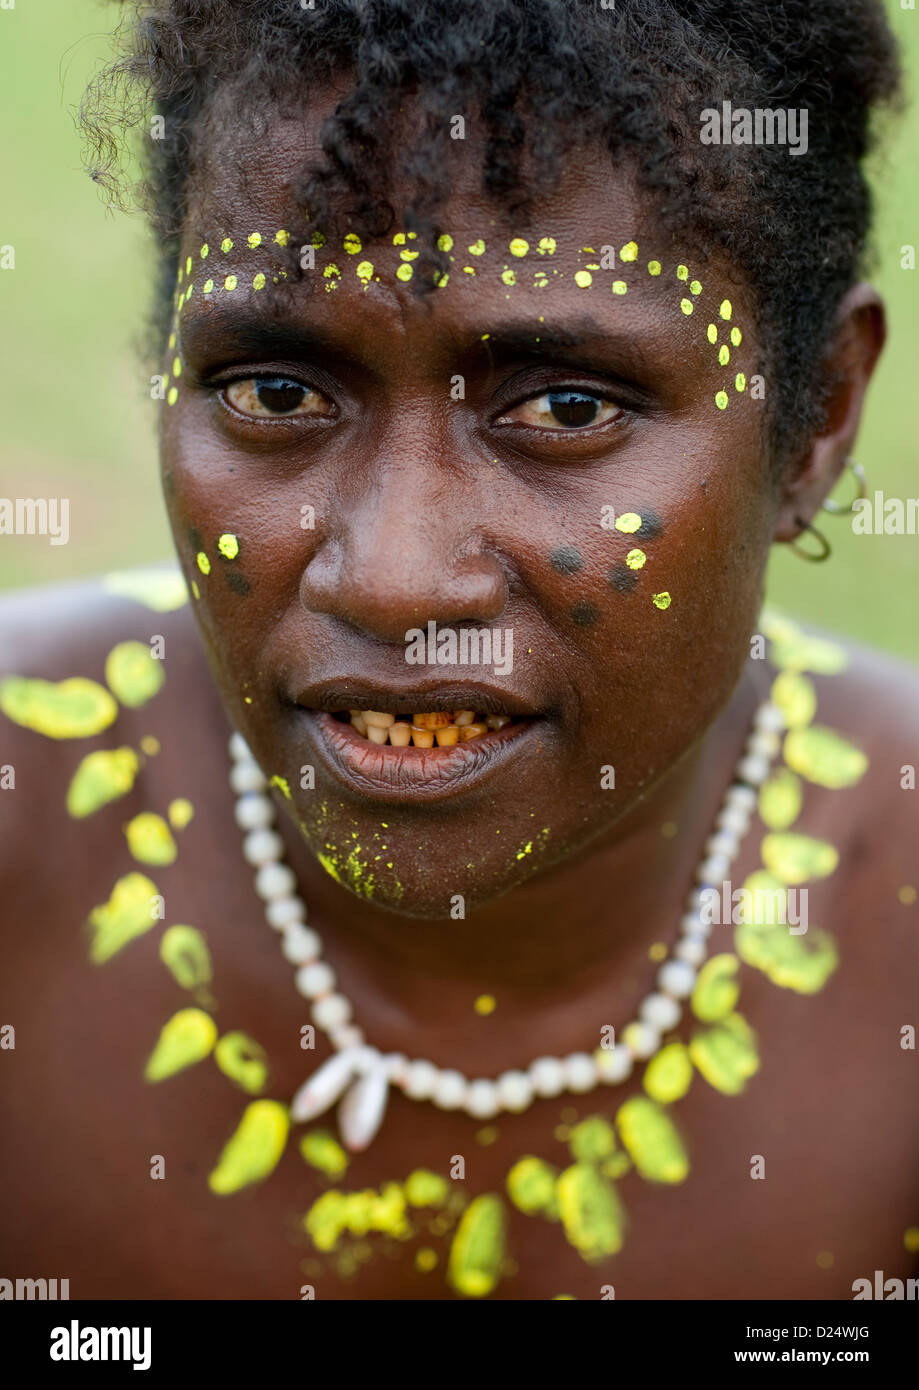 Woman From Autonomous Region Of Bougainville In Traditionnal Clothes, Papua New Guinea Stock Photo